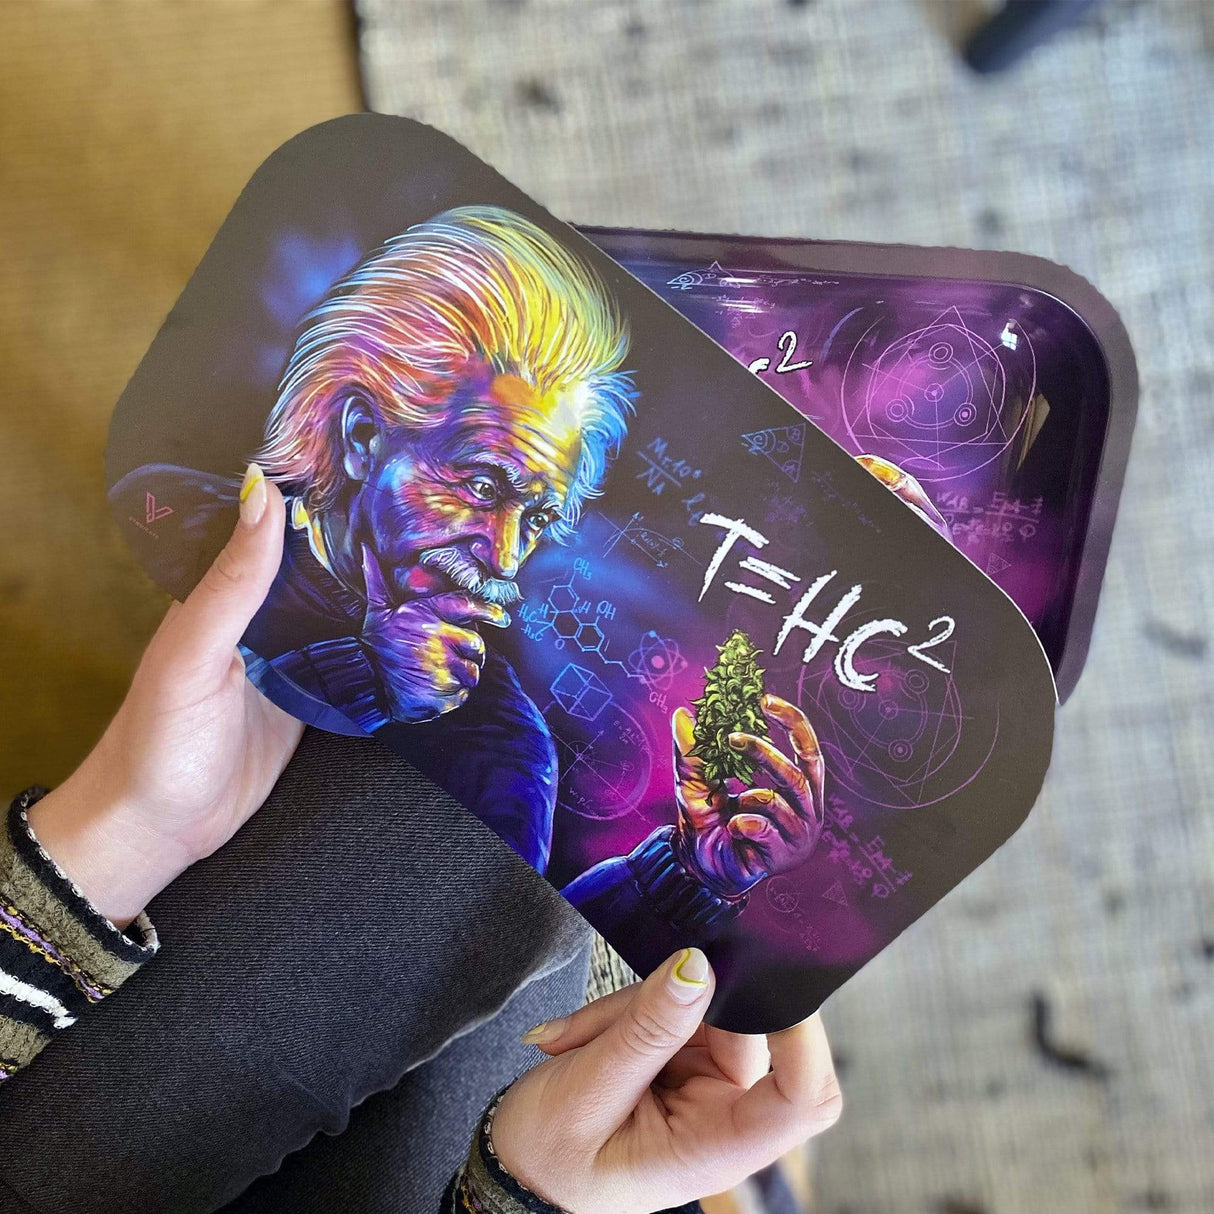 V Syndicate T=HC2 Einstein Roll N Go Bundle, colorful design, portable magnetic rolling tray in hand